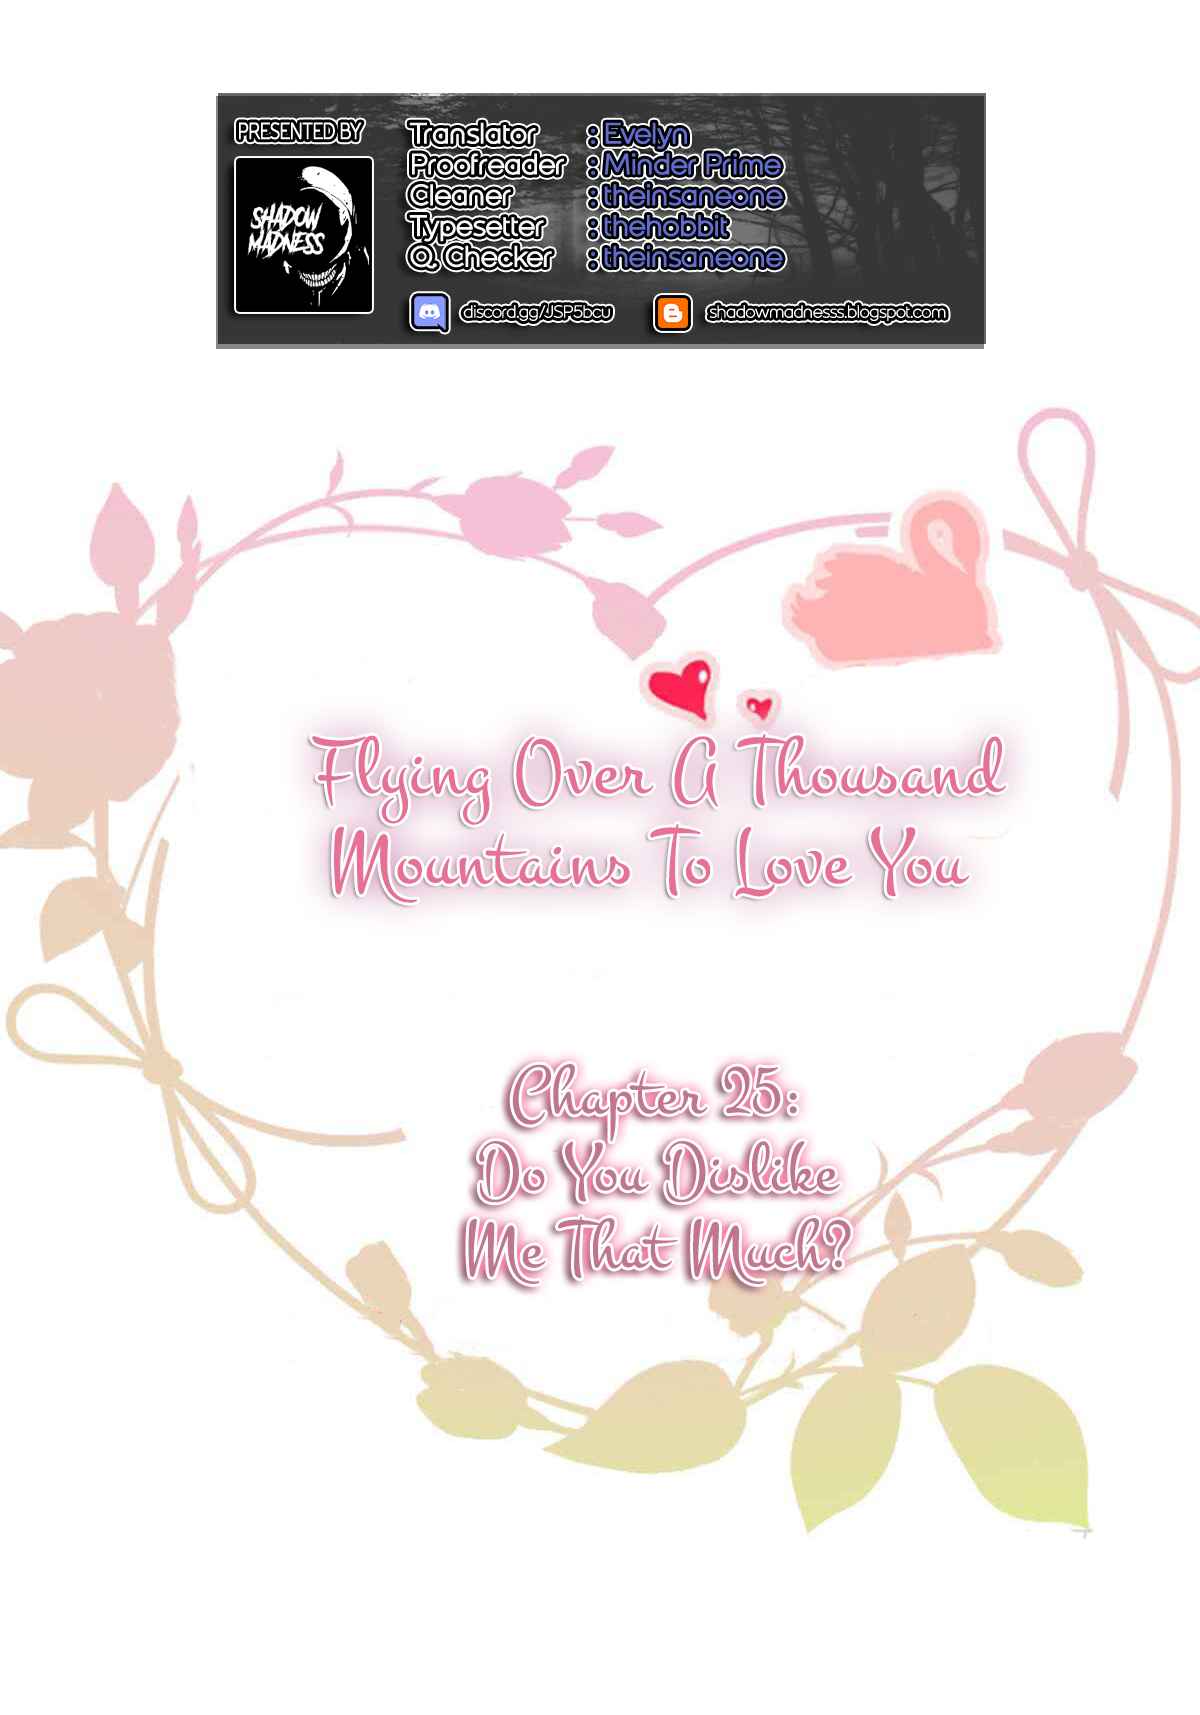 Flying Over a Thousand Mountains to Love You Ch. 25 Do You Dislike Me That Much?